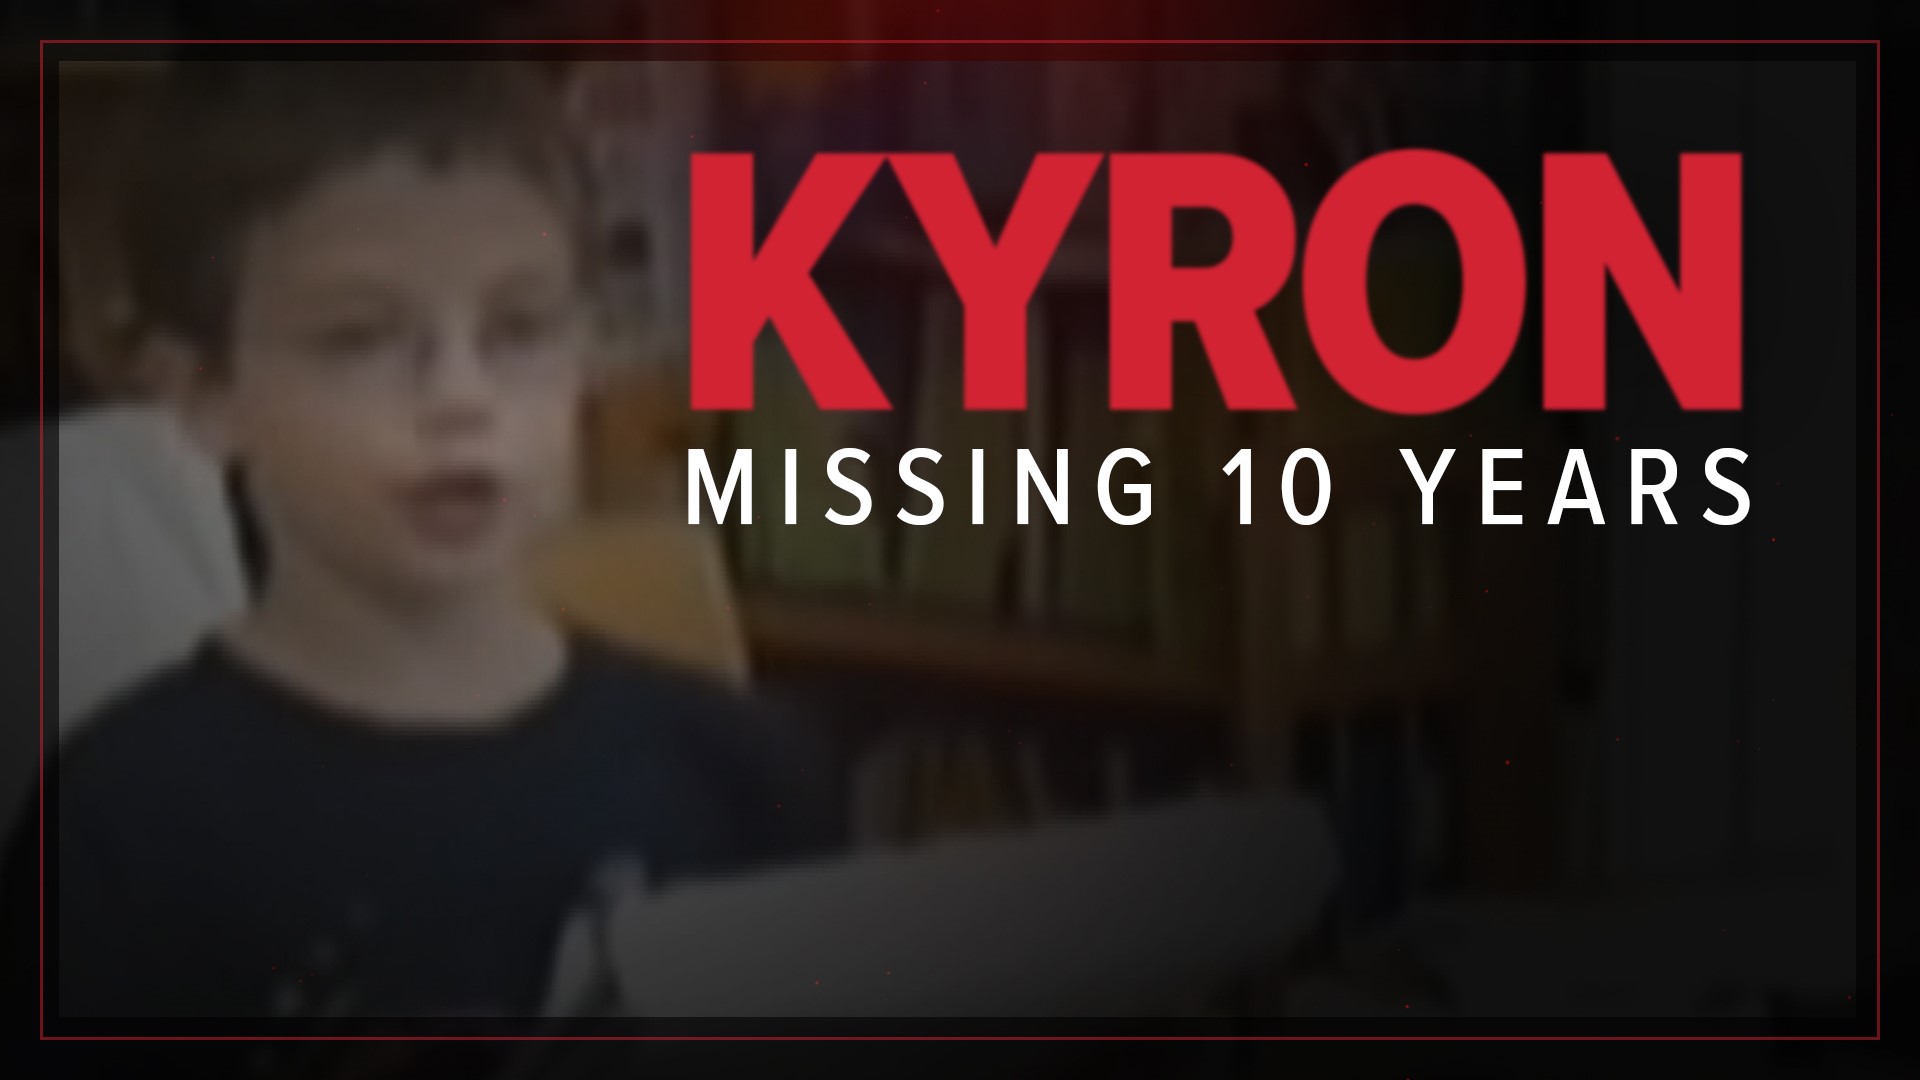 June 4 marks 10 years since Kyron Horman disappeared. The second grader was last seen at Skyline School in Northwest Portland. He has never been found.